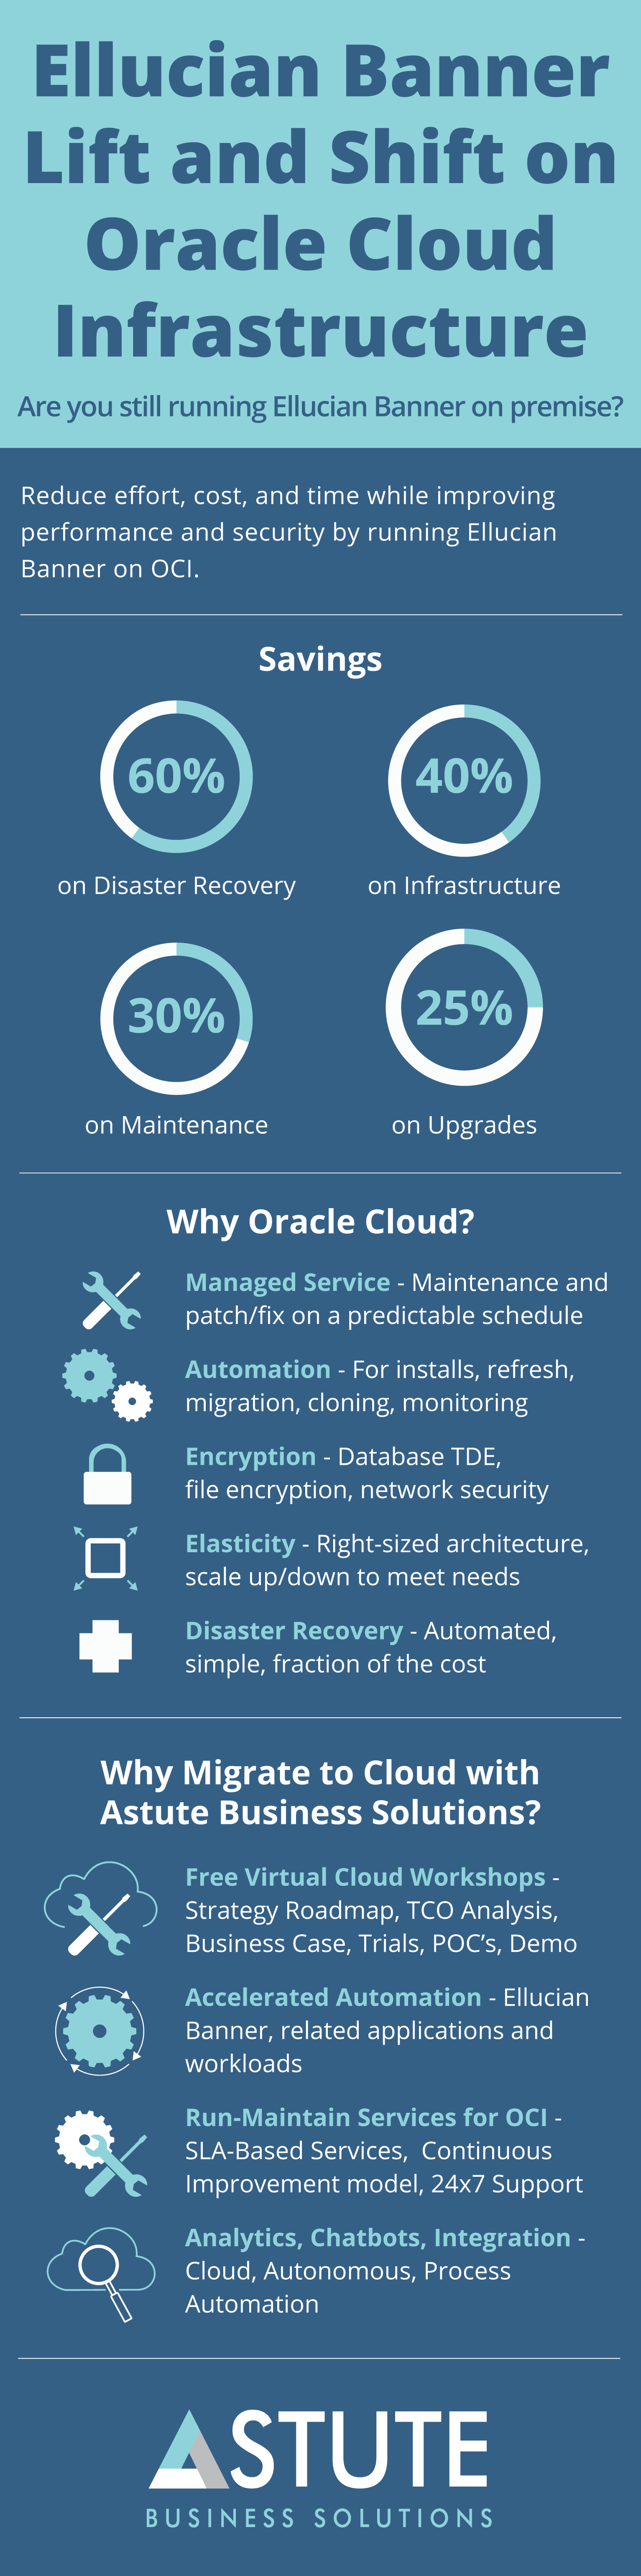 Why Migrate Banner to Oracle Cloud Infrastructure?